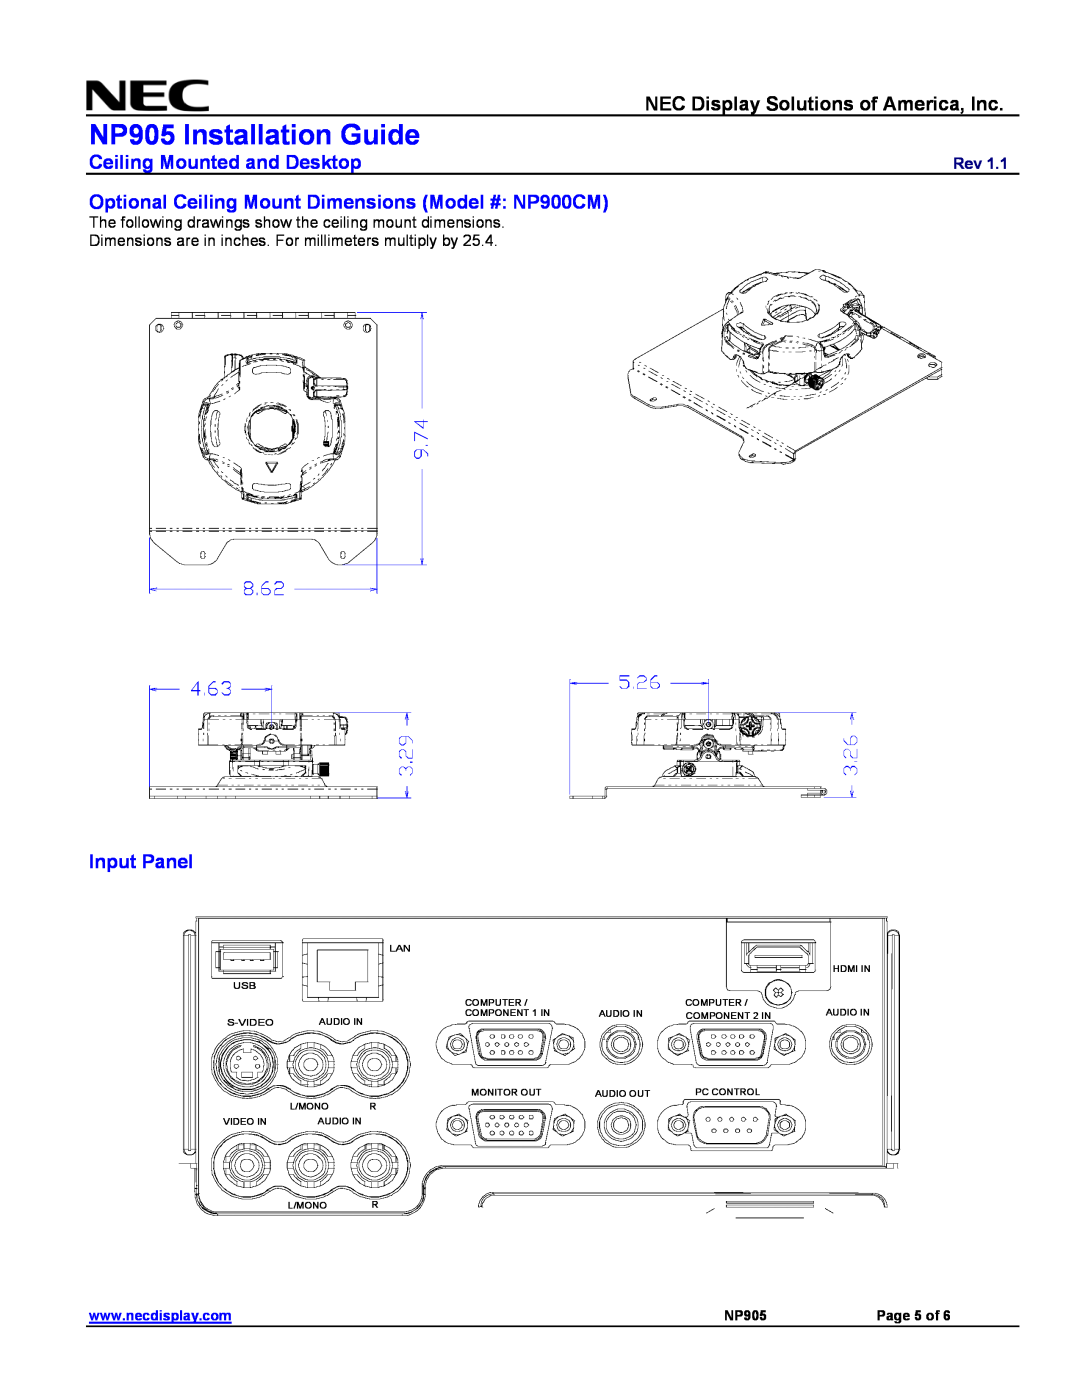 NEC specifications Optional Ceiling Mount Dimensions Model # NP900CM, Input Panel, NP905 Installation Guide, Page 5 of 